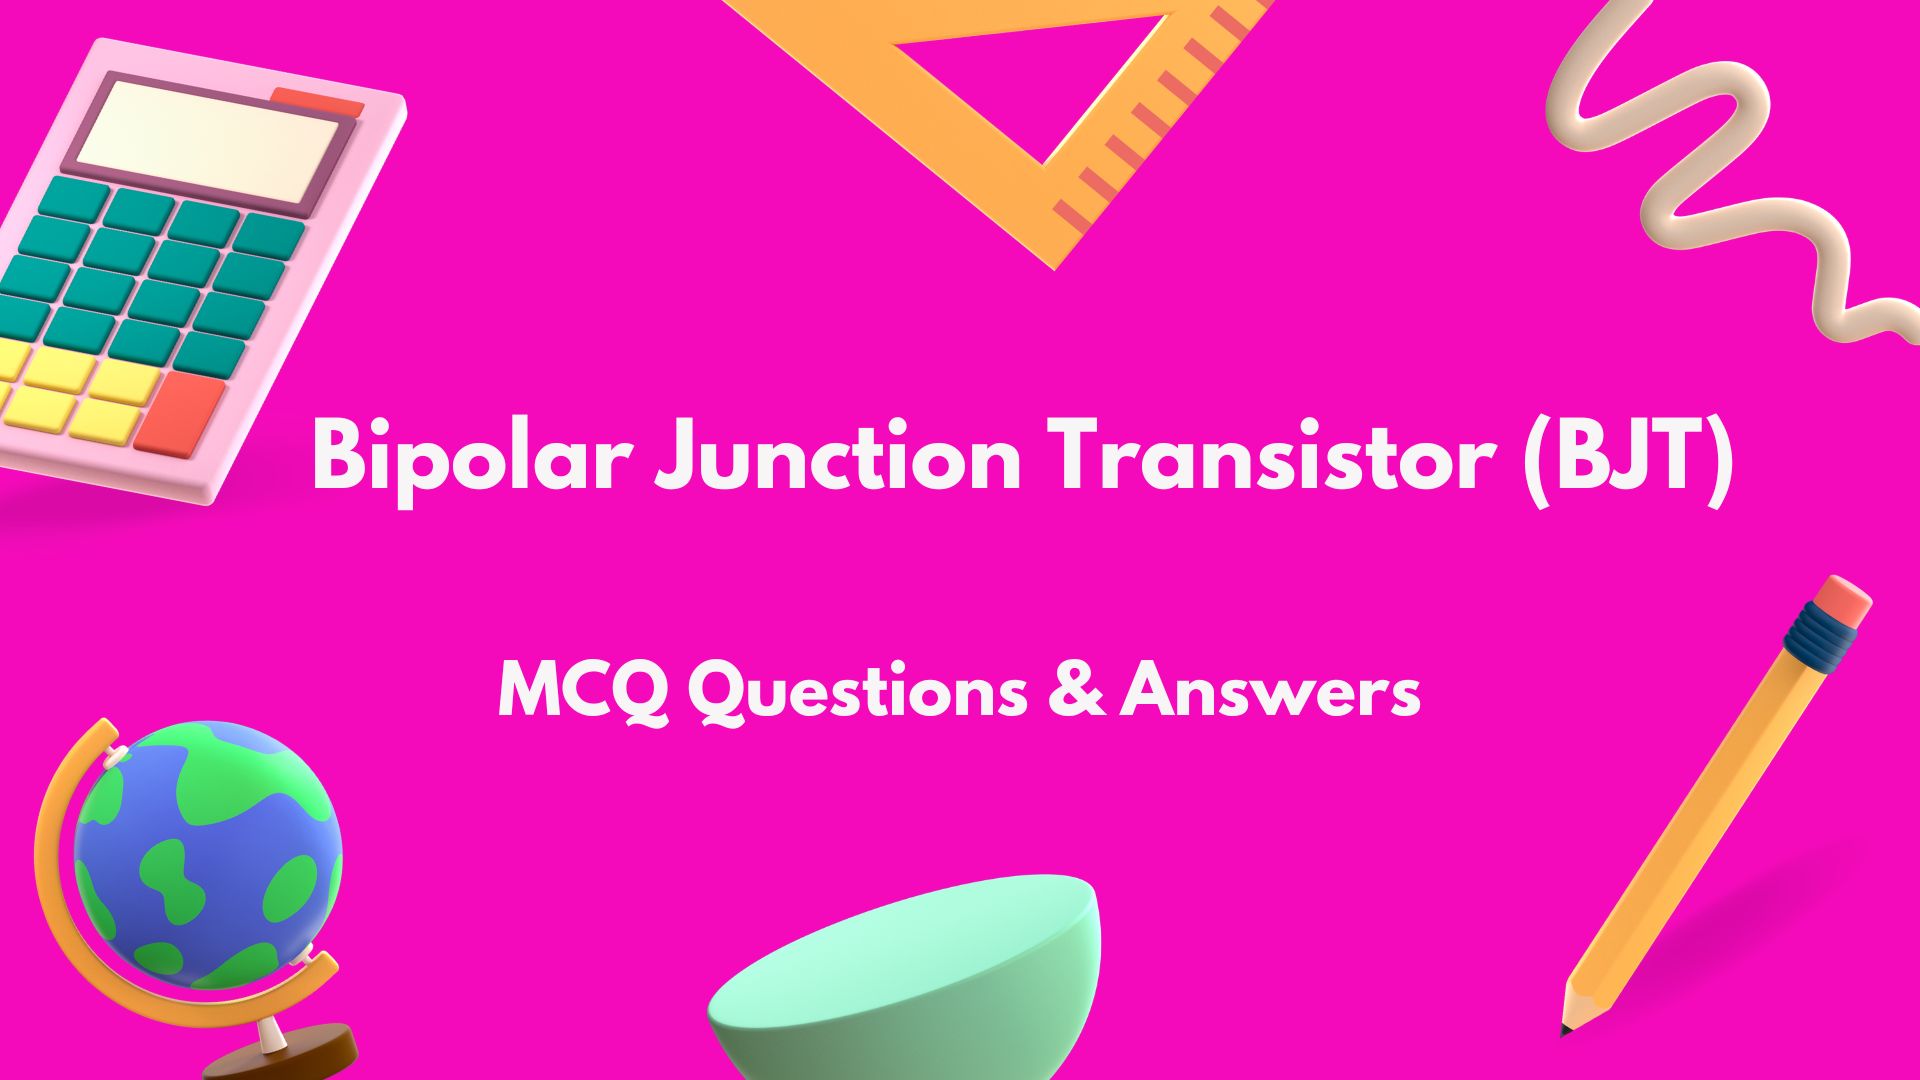 Bipolar Junction Transistor (BJT) MCQ Questions and Answers